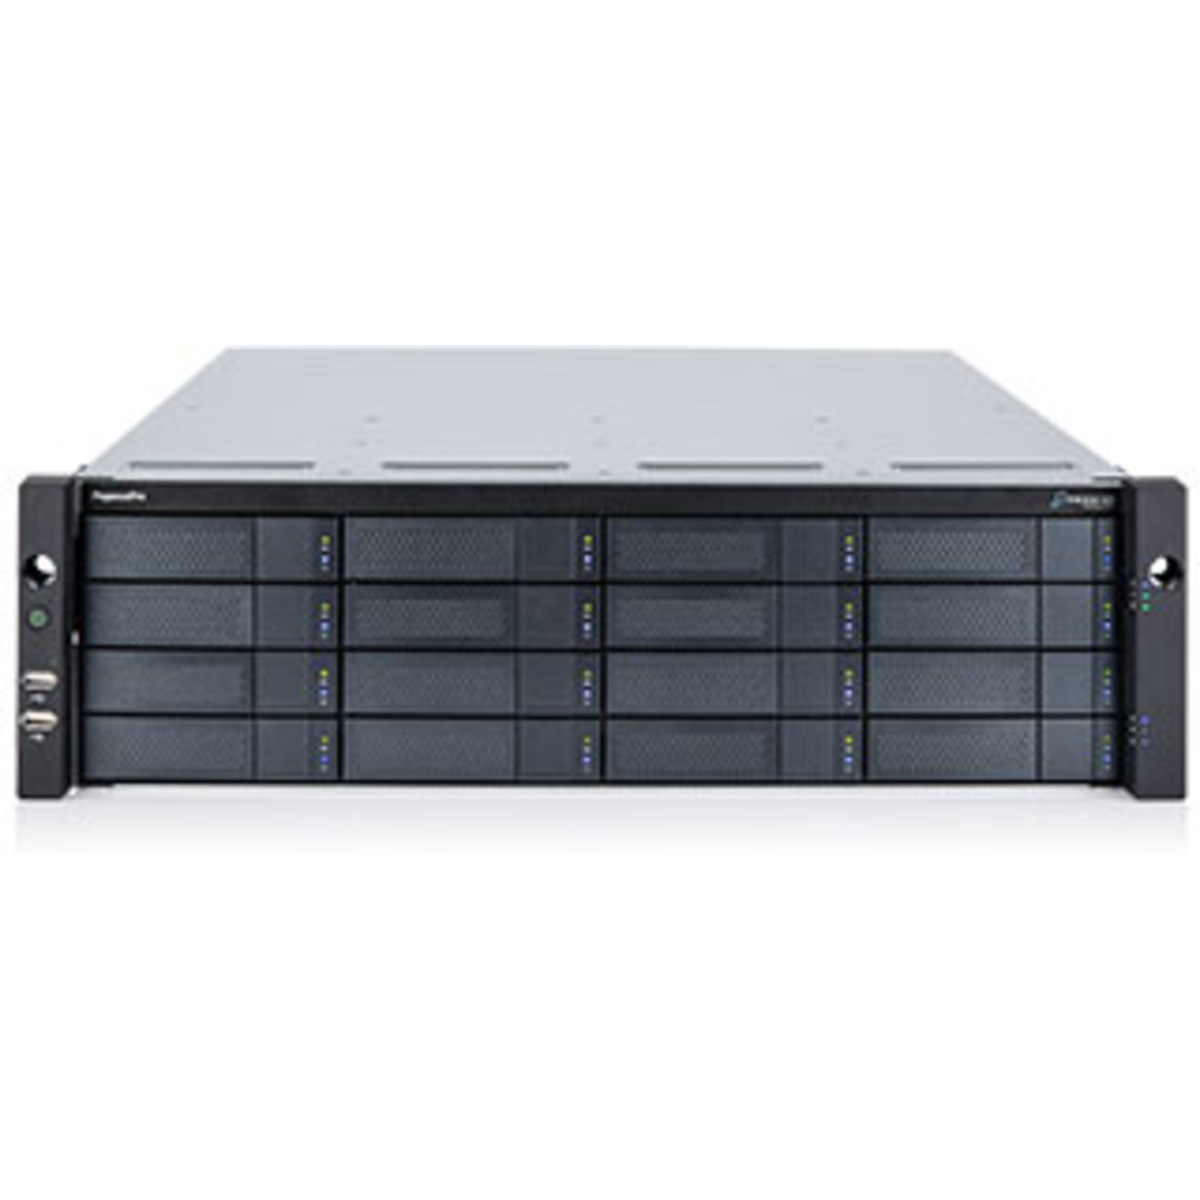 Promise Technology PegasusPro R16 64tb 16-Bay RackMount Multimedia / Power User / Business DAS-NAS - Combo Direct + Network Storage Device 16x4tb Sandisk Ultra 3D SDSSDH3-4T00 2.5 560/520MB/s SATA 6Gb/s SSD CONSUMER Class Drives Installed - Burn-In Tested PegasusPro R16